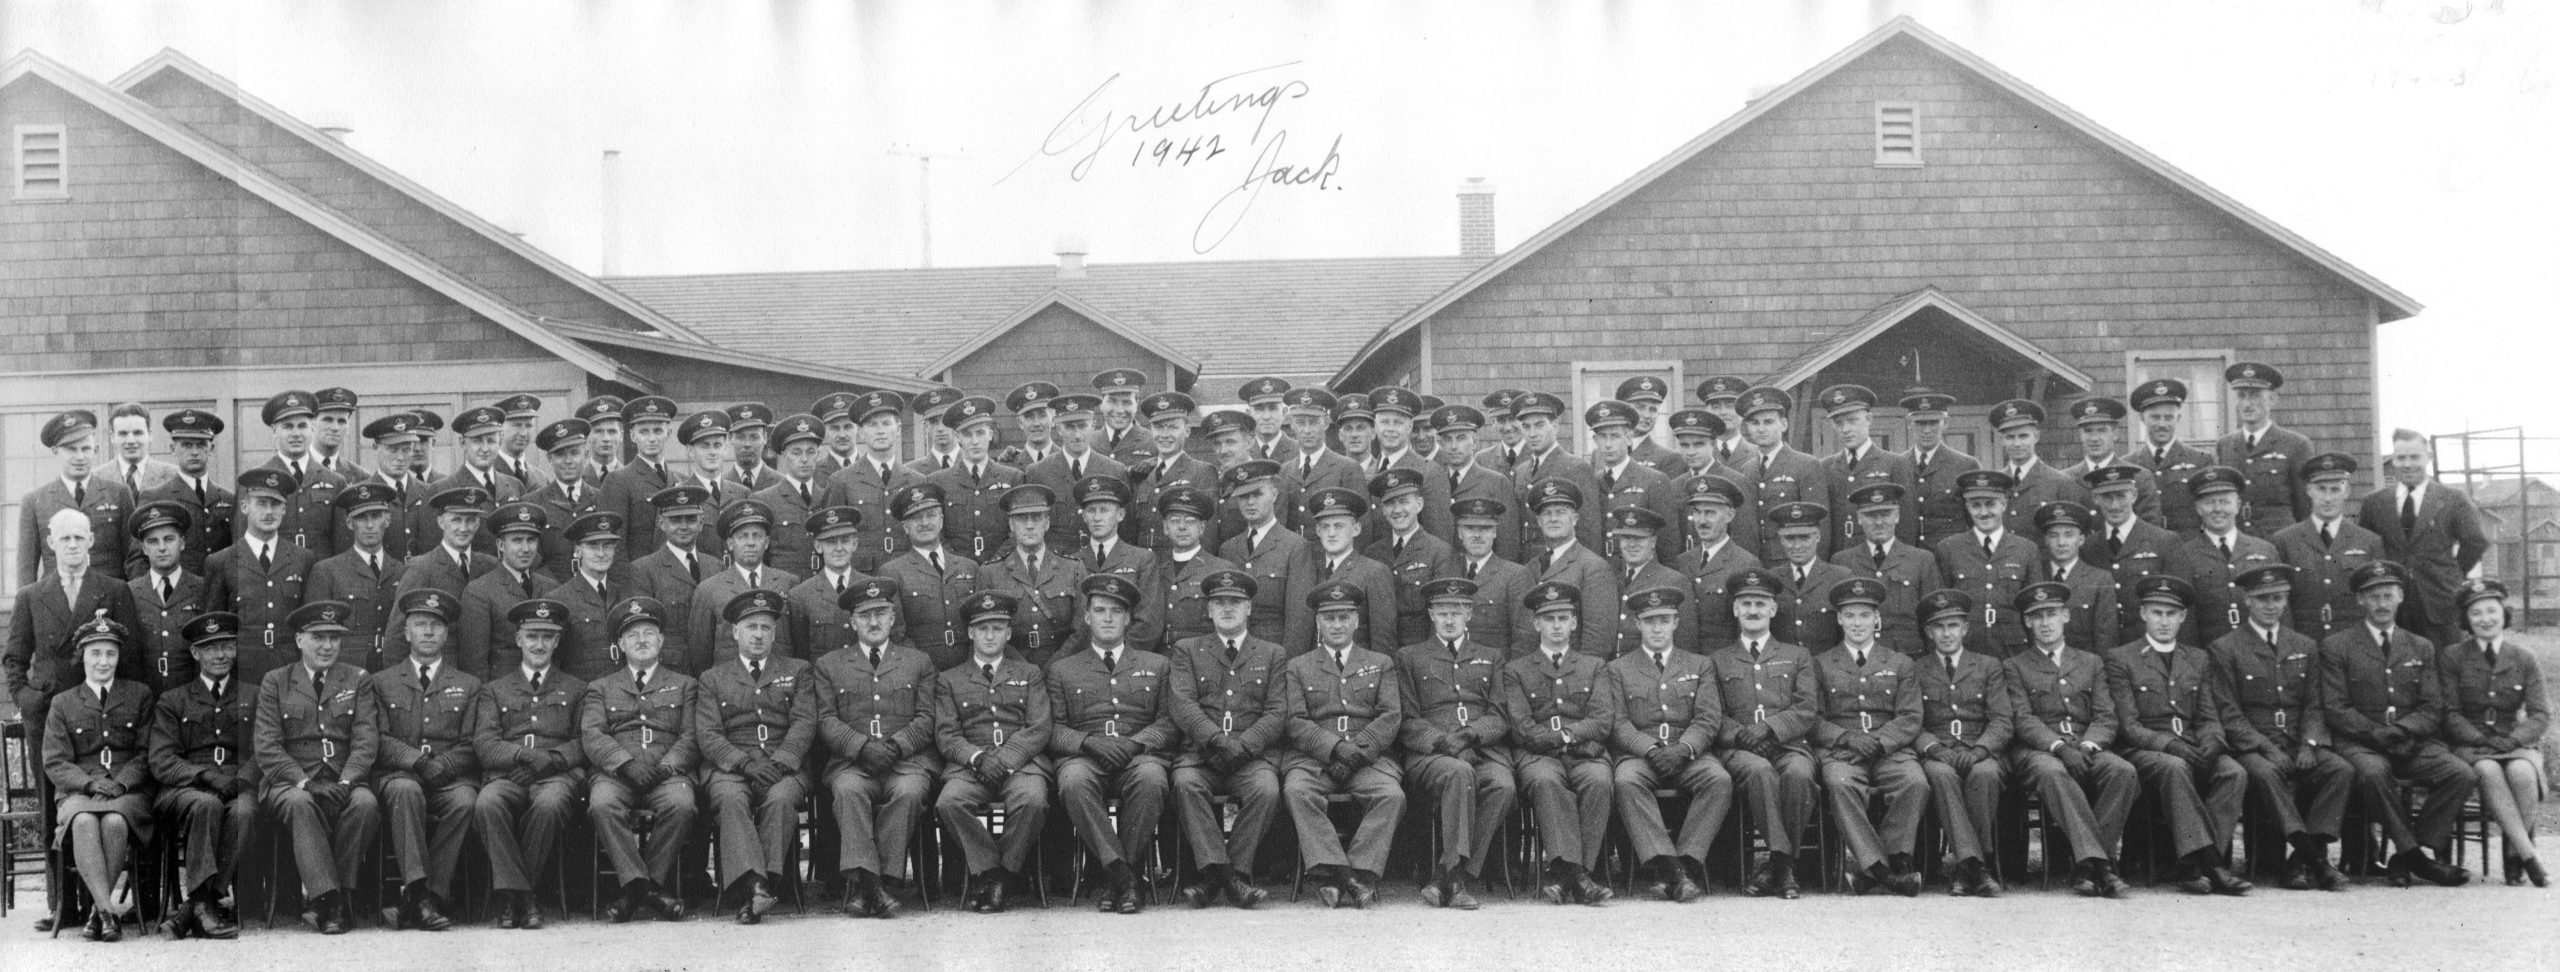 Large group photo of military men and women in front of station headquarters